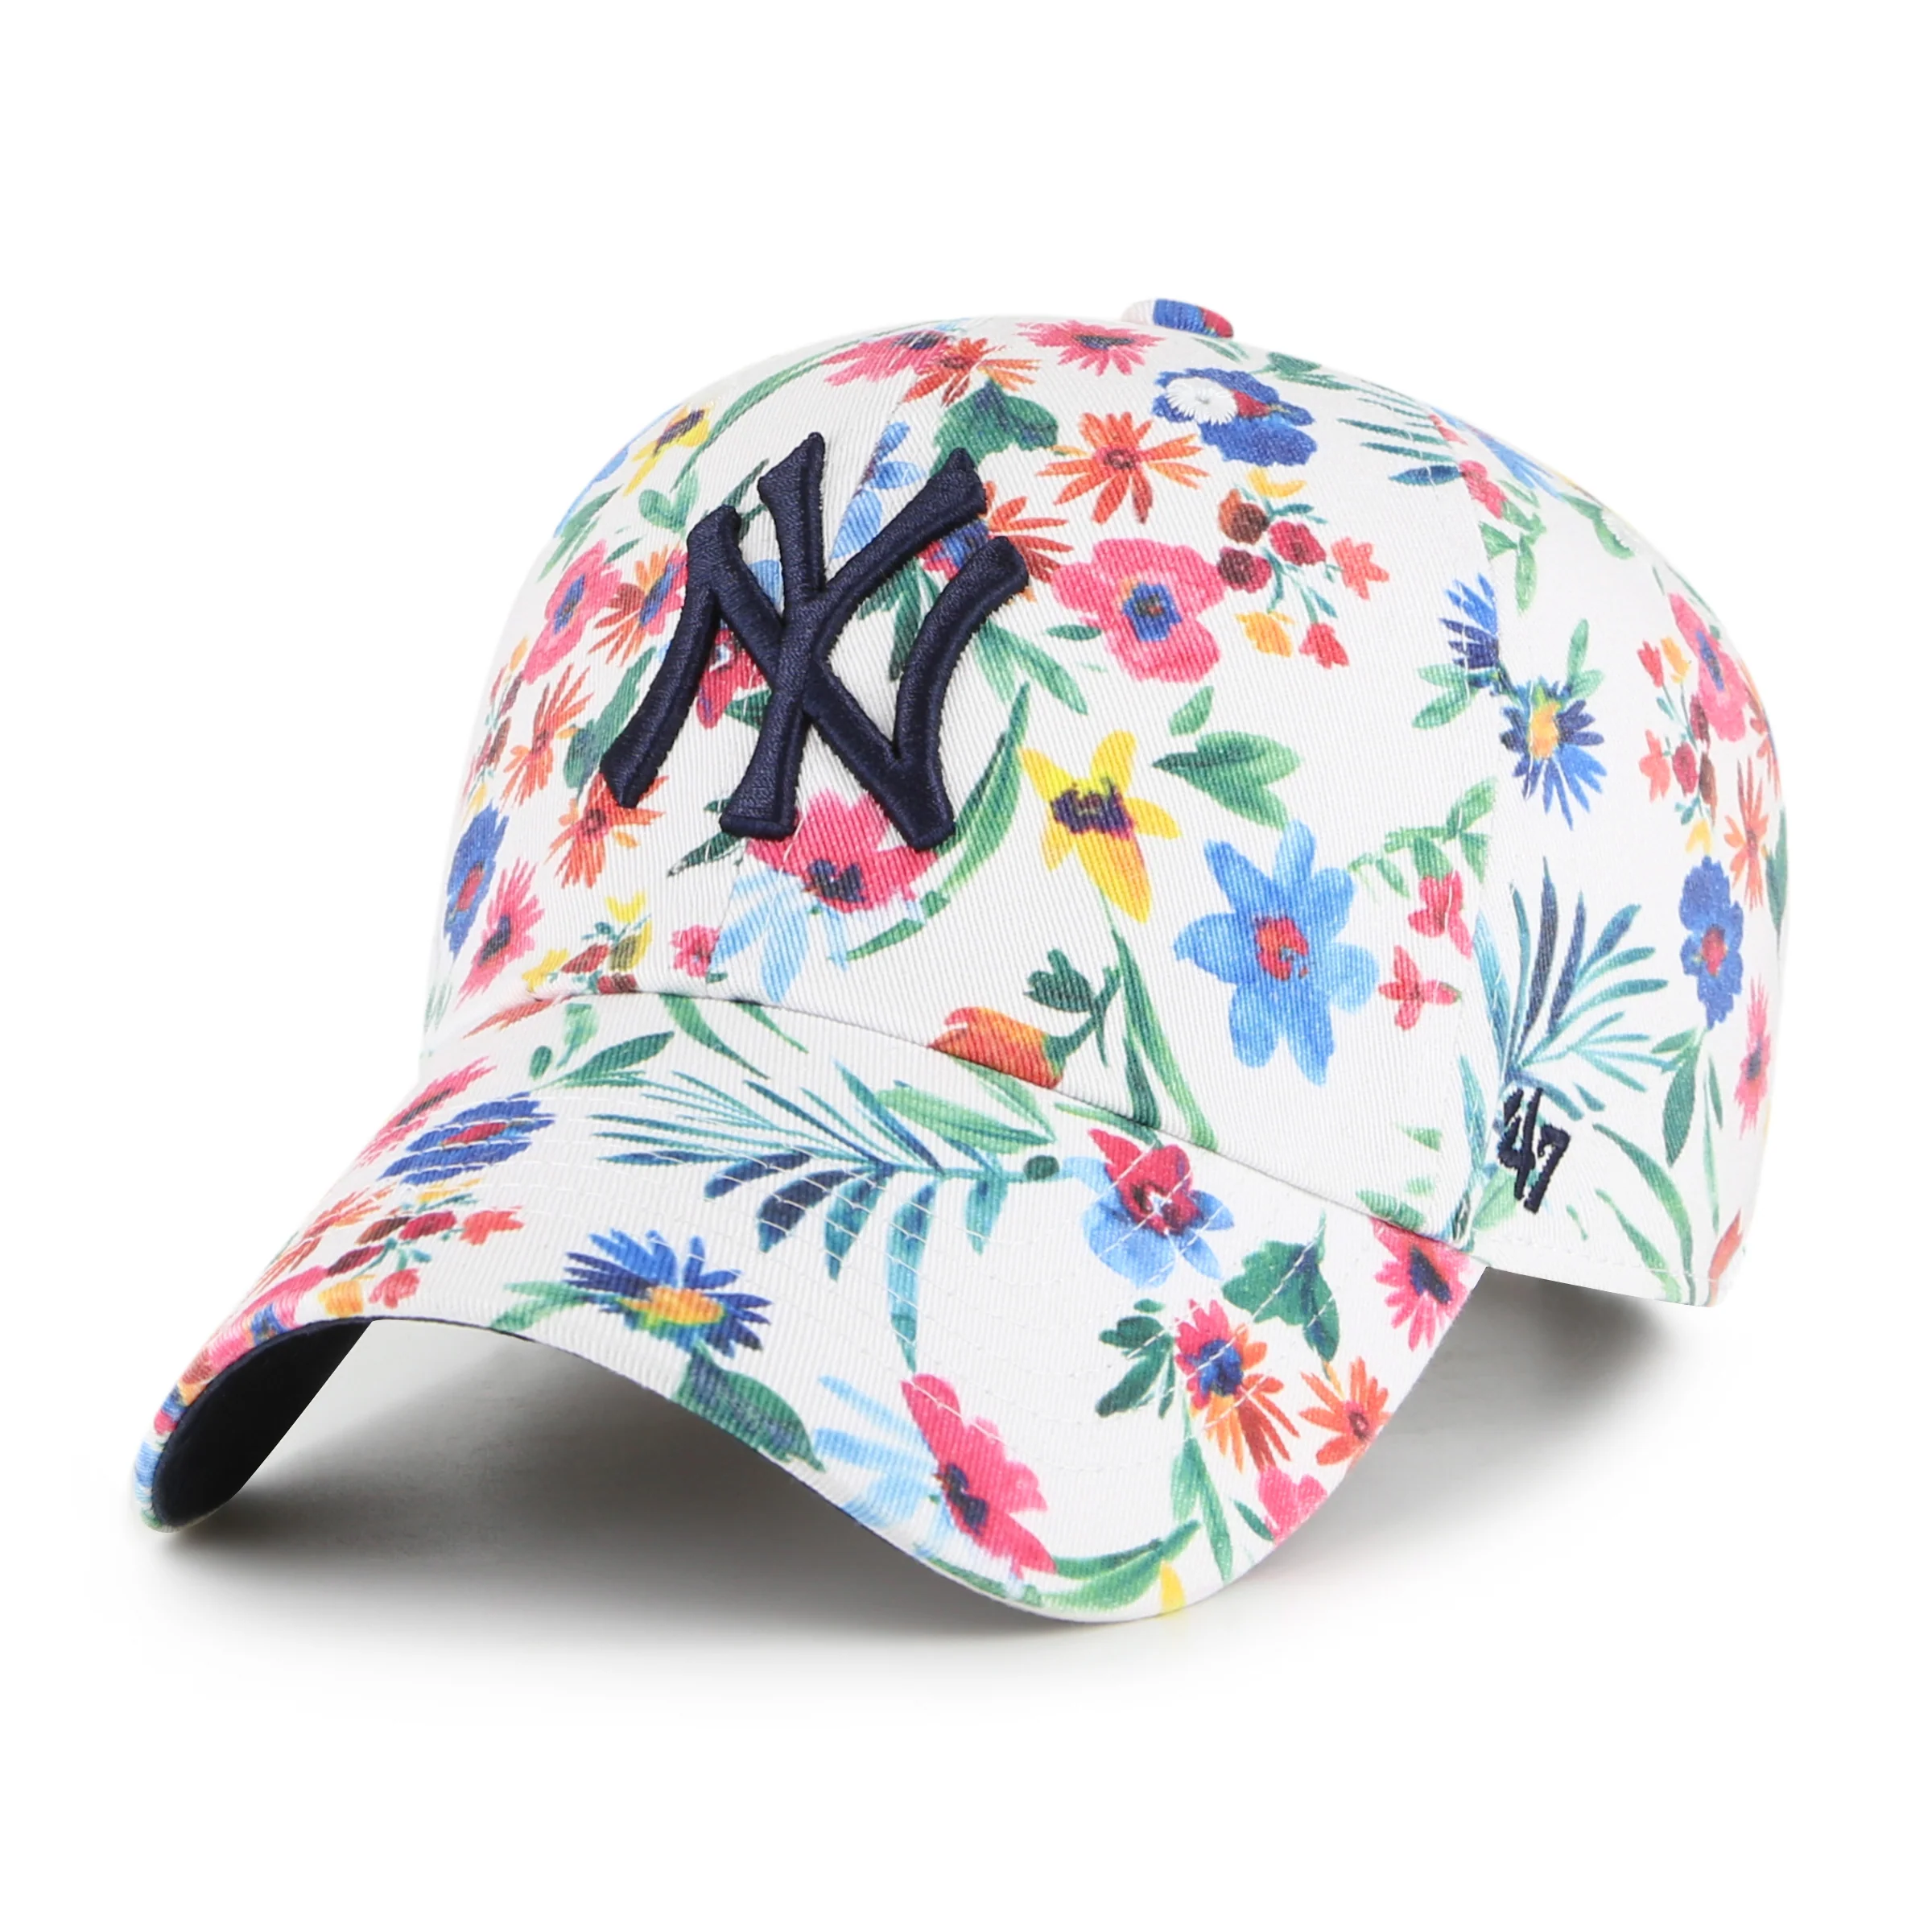 The best selling] New York Yankees MLB Floral All Over Printed